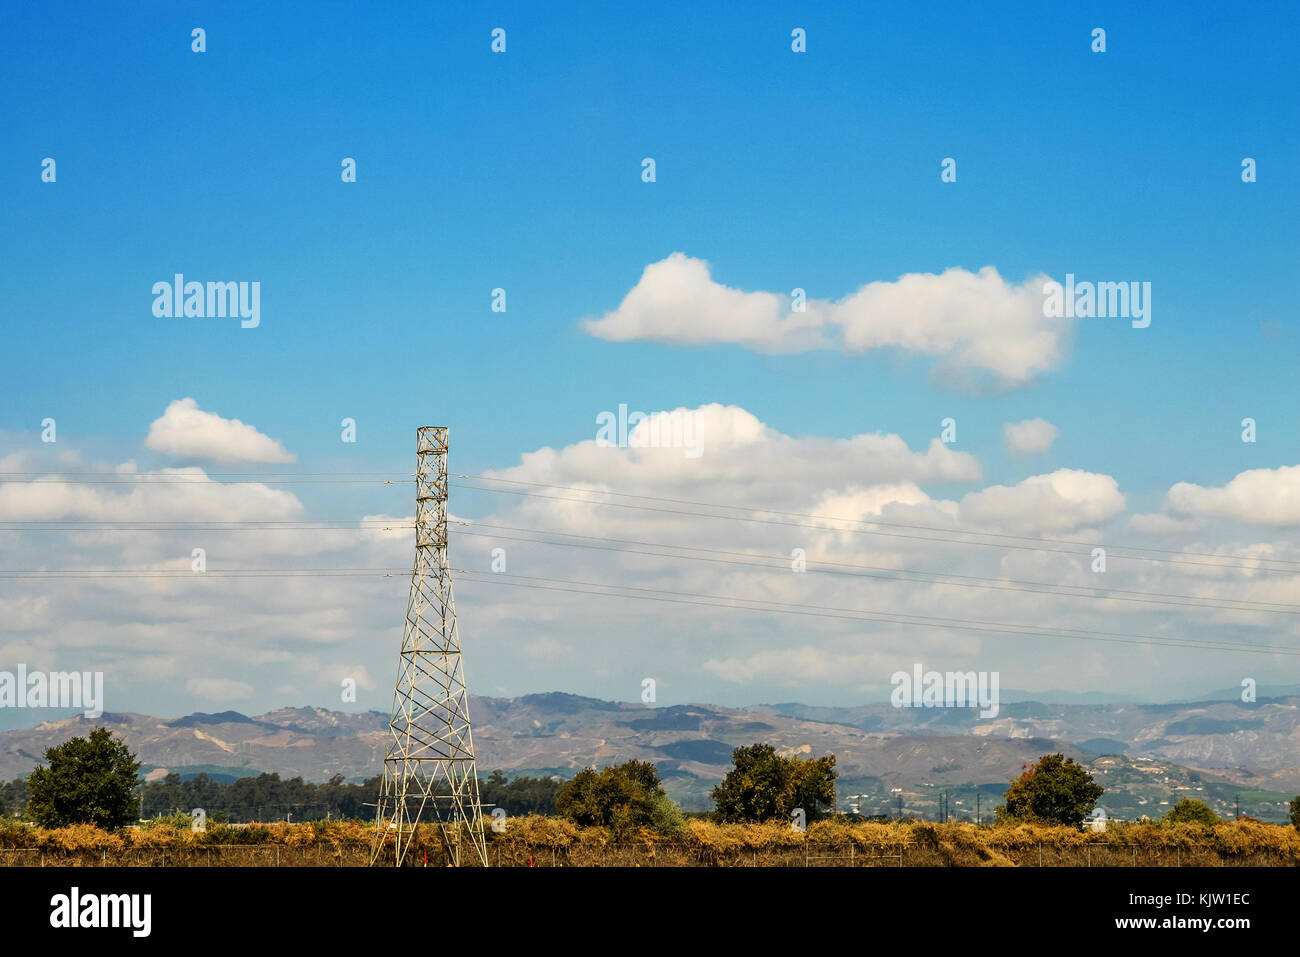 Electric power tower framed by a beautiful rural landscape with blue sky and white clouds. Stock Photo